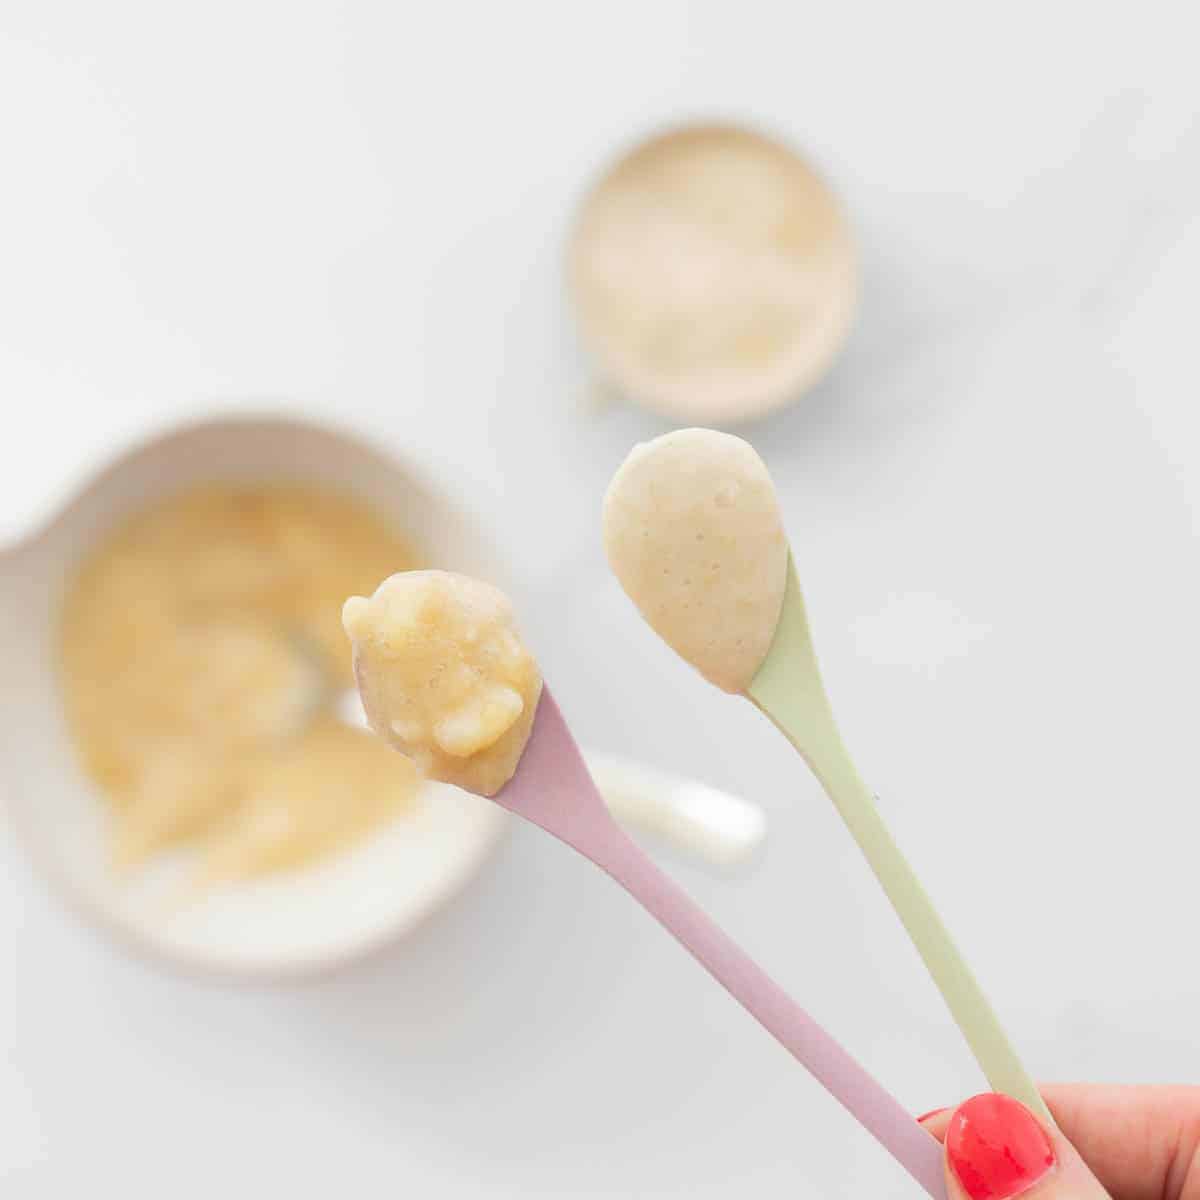 Two baby spoons being held up to the camera, one of mashed banana, and one of banana puree. 